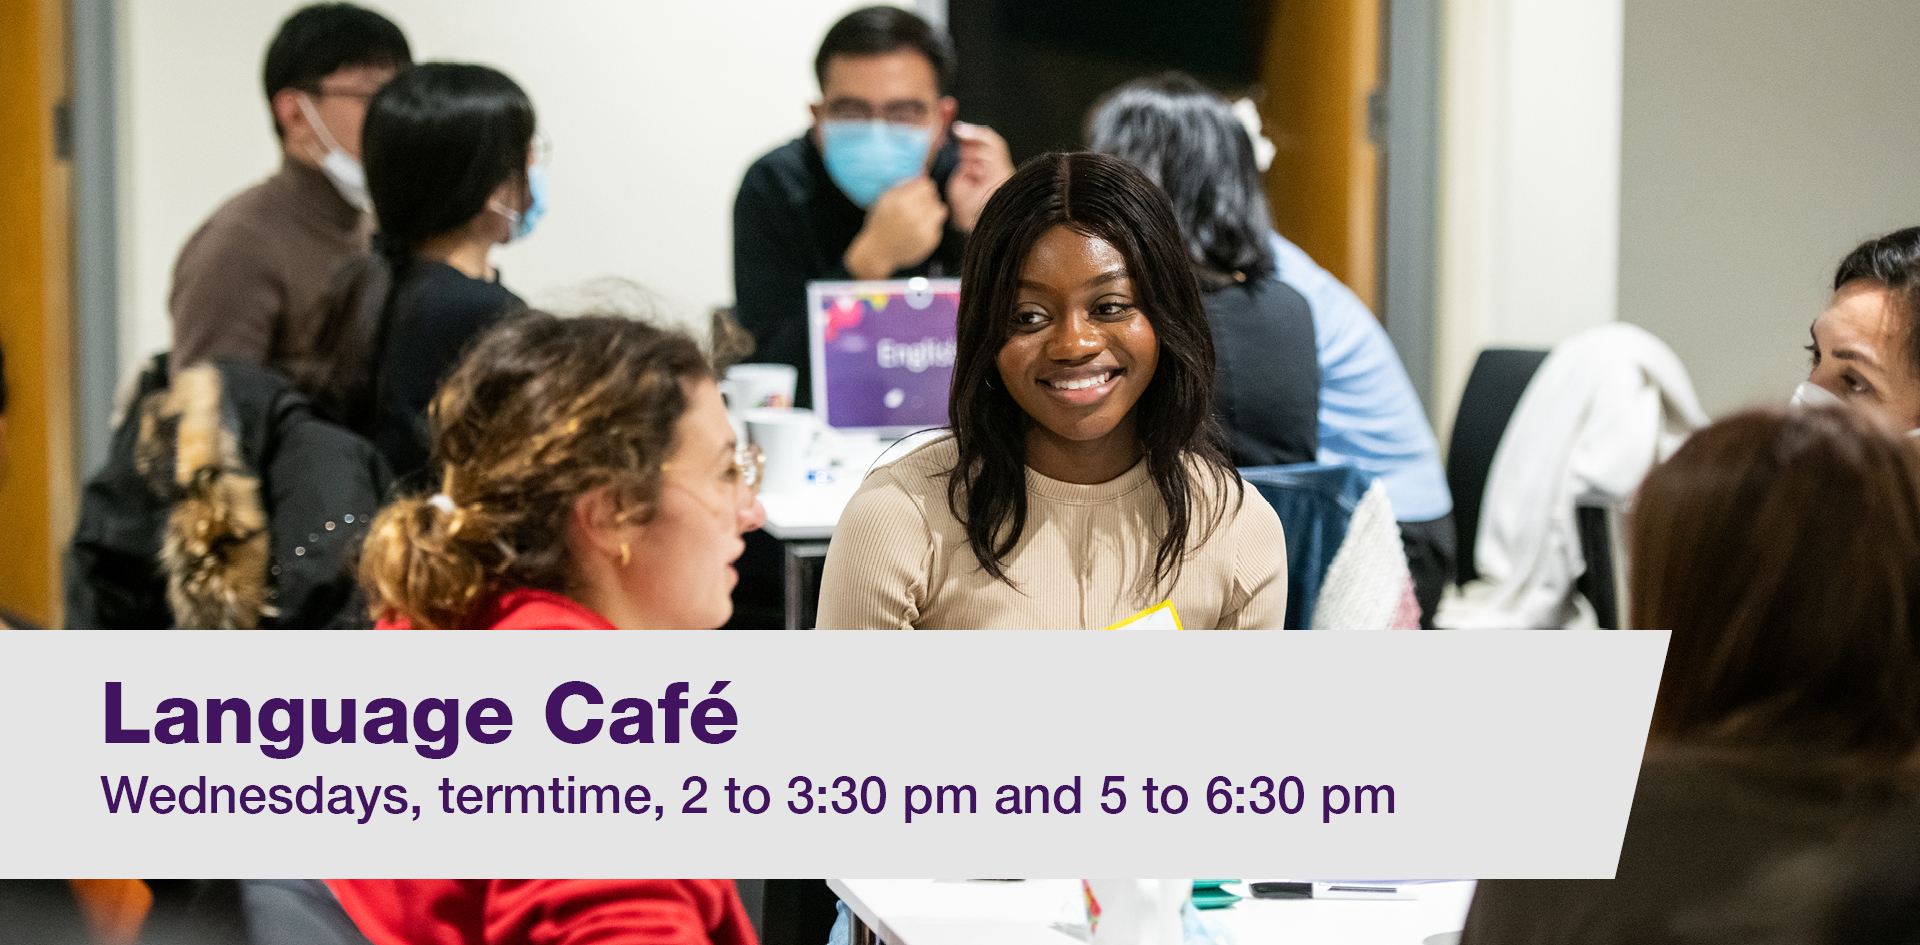 Language Cafe Wednesdays in termtime